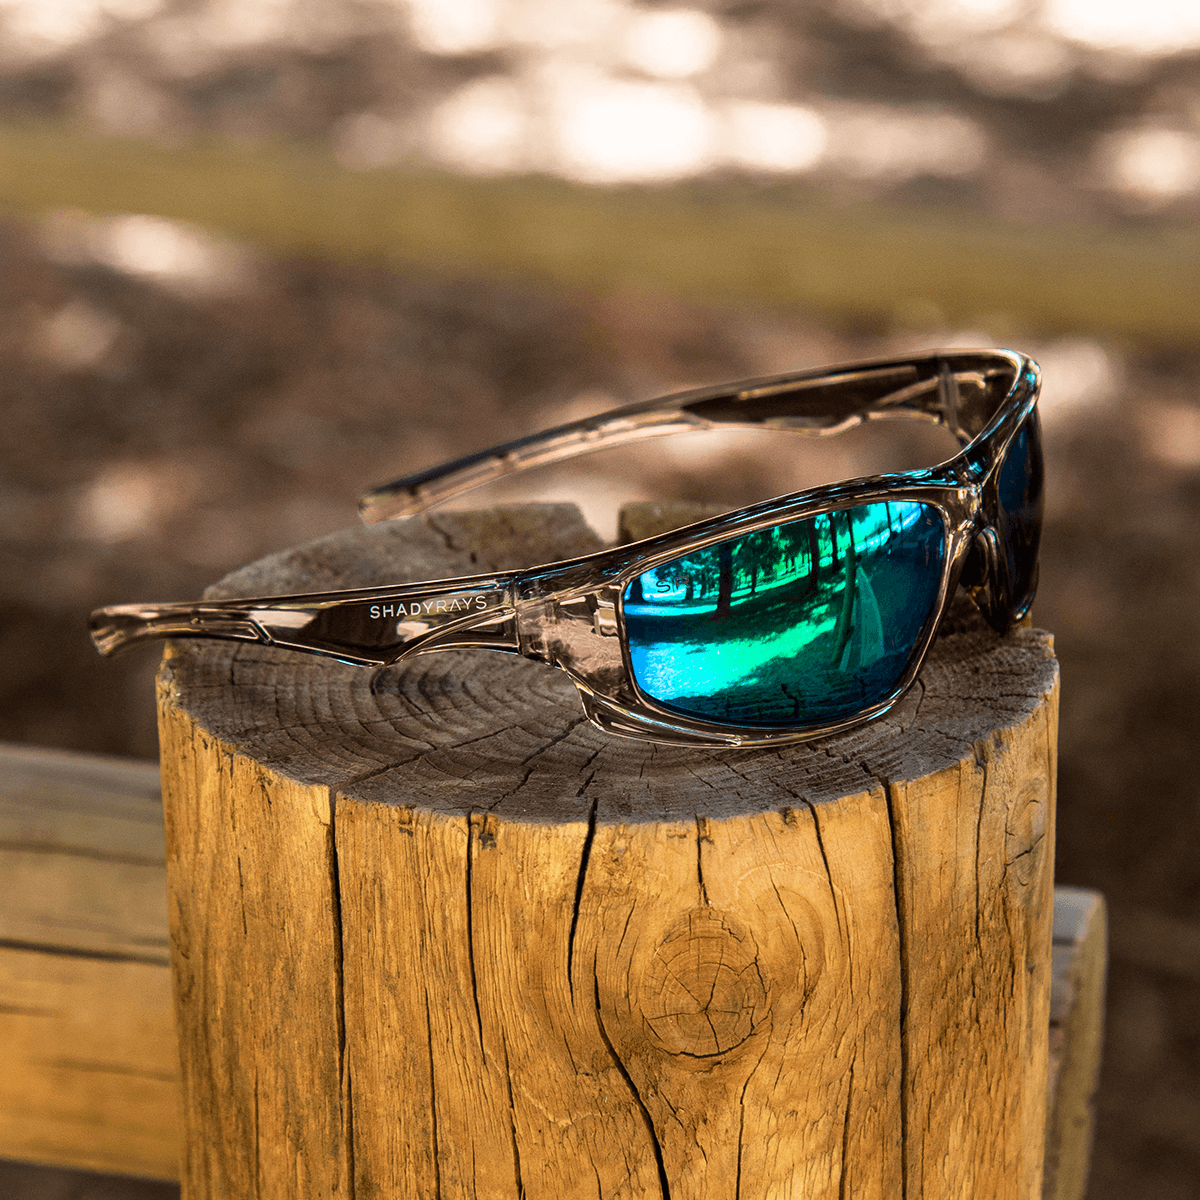 x Series - Emerald Smoke Polarized Sunglasses | Gloss Sport Sunglasses | Cycling Glasses | Best Christmas Gifts | Gifts for The Holidays | Unique